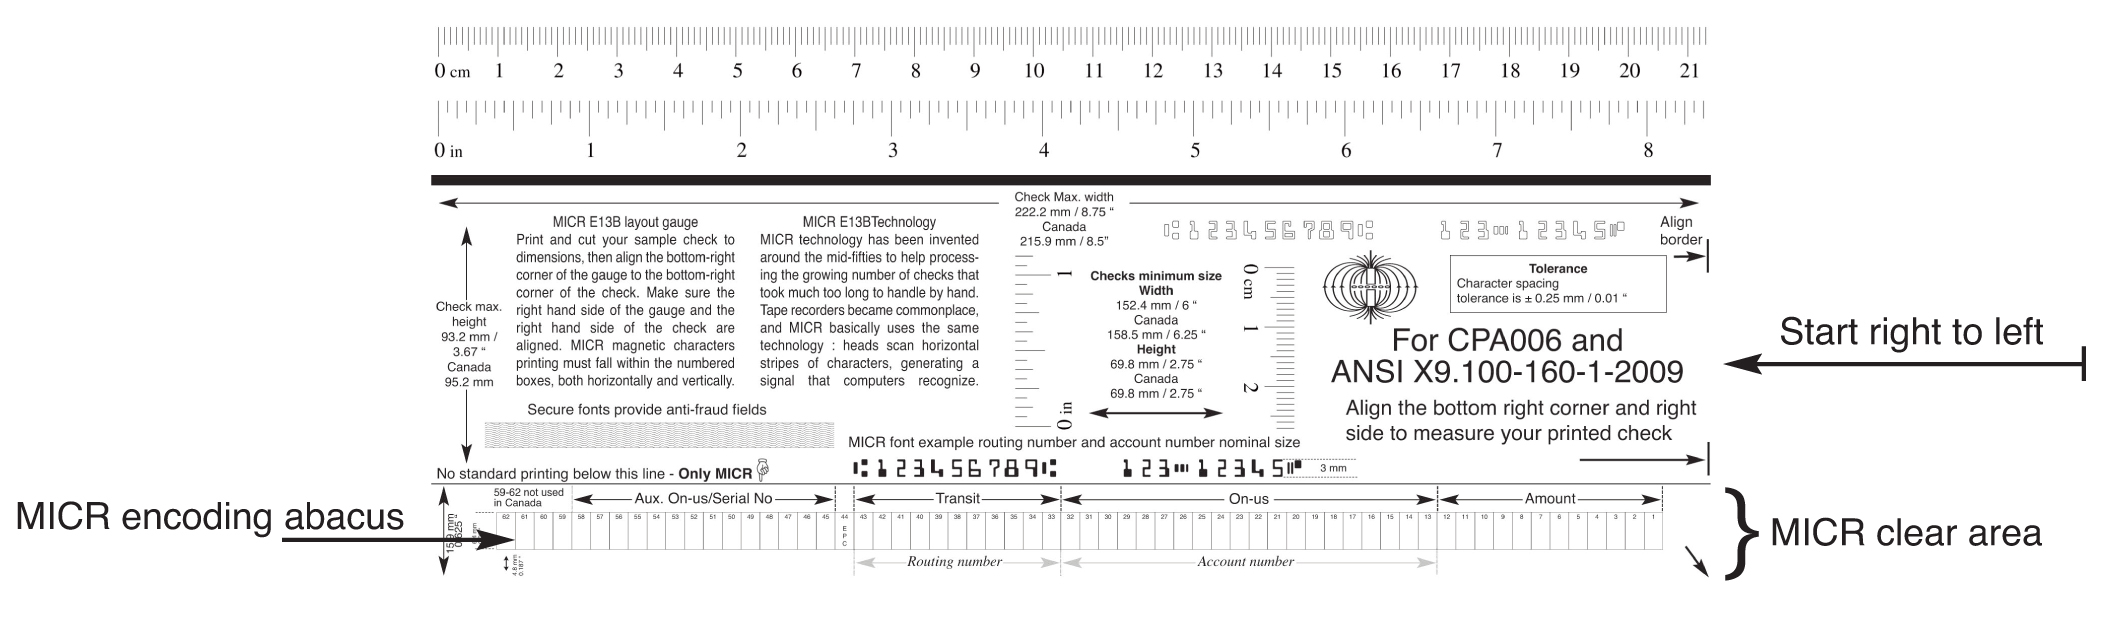 MICR Check Position Gauge : Print it yourself in minutes [Download]